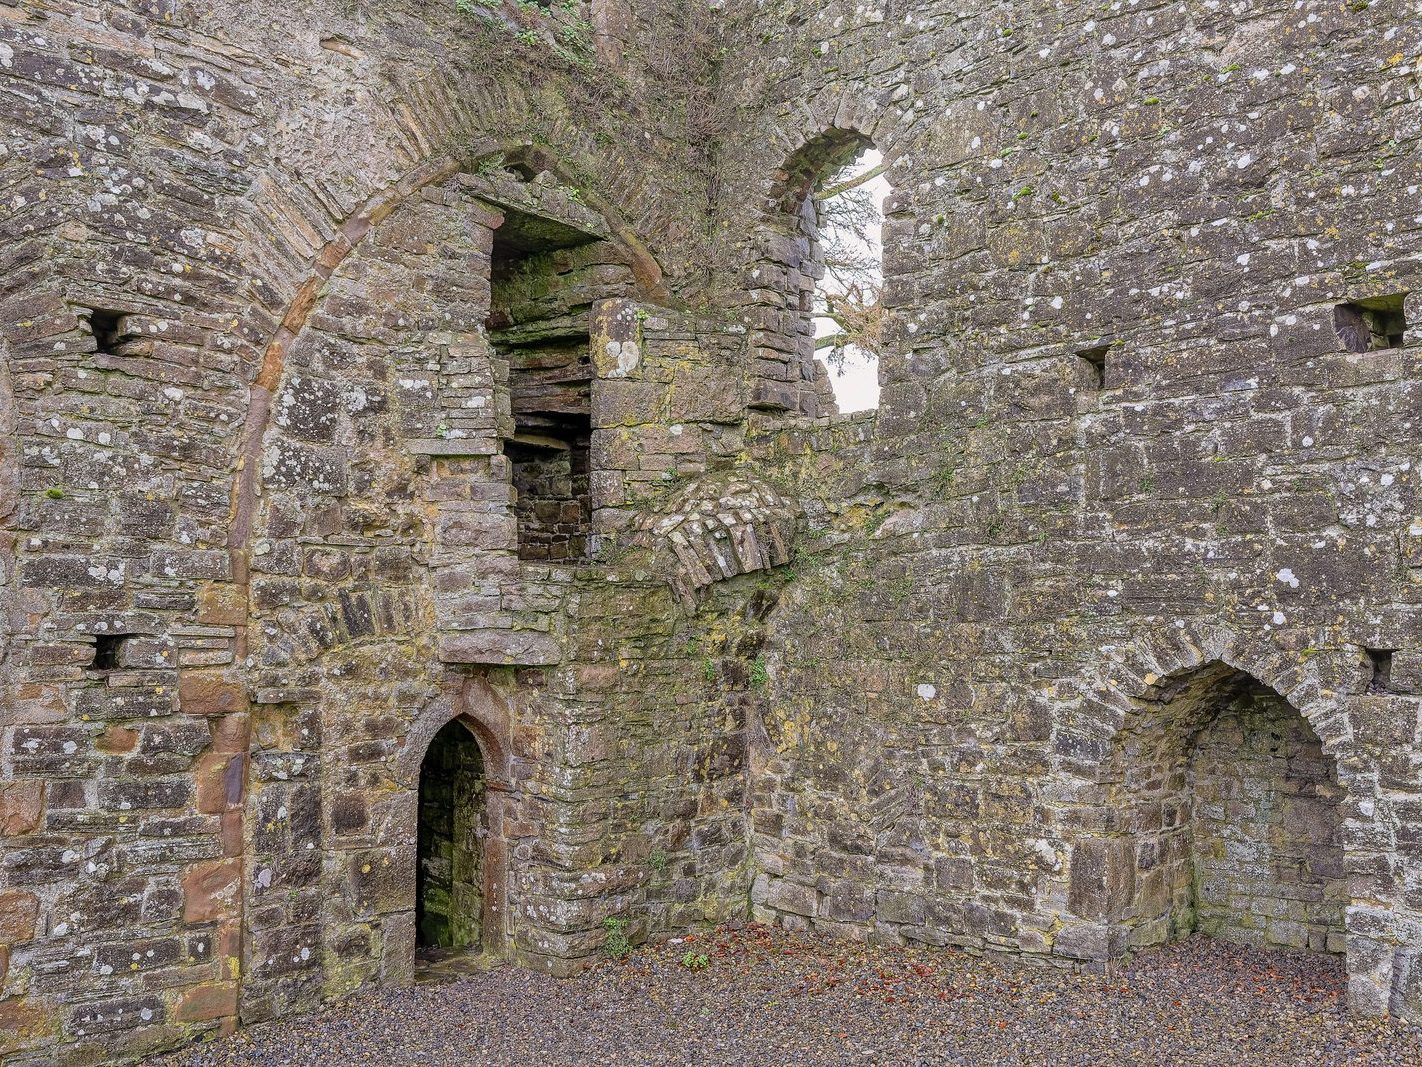 BECTIVE ABBEY WHICH I VISITED LAST CHRISTMAS [THERE WERE NO OTHER VISITORS AS IT WAS A VERY WET DAY]--225236-1